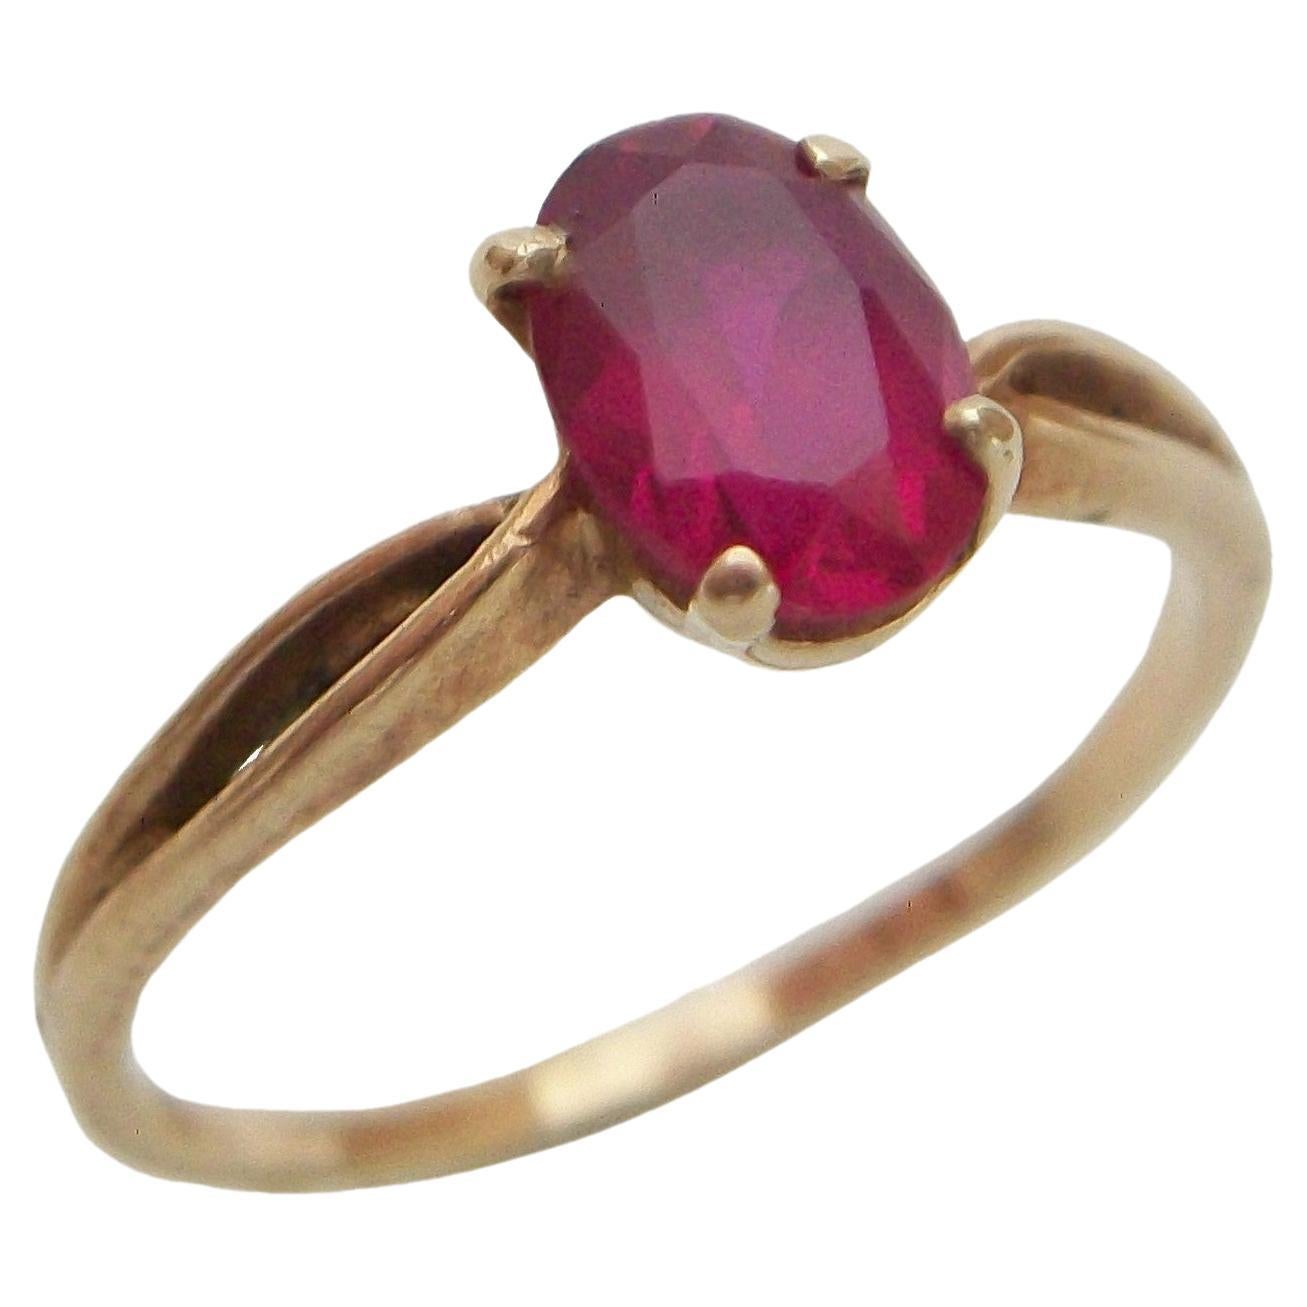 Vintage Red Topaz & 10K Yellow Gold Ring - Size 5.5 - U.S.A. - Circa 1980's For Sale